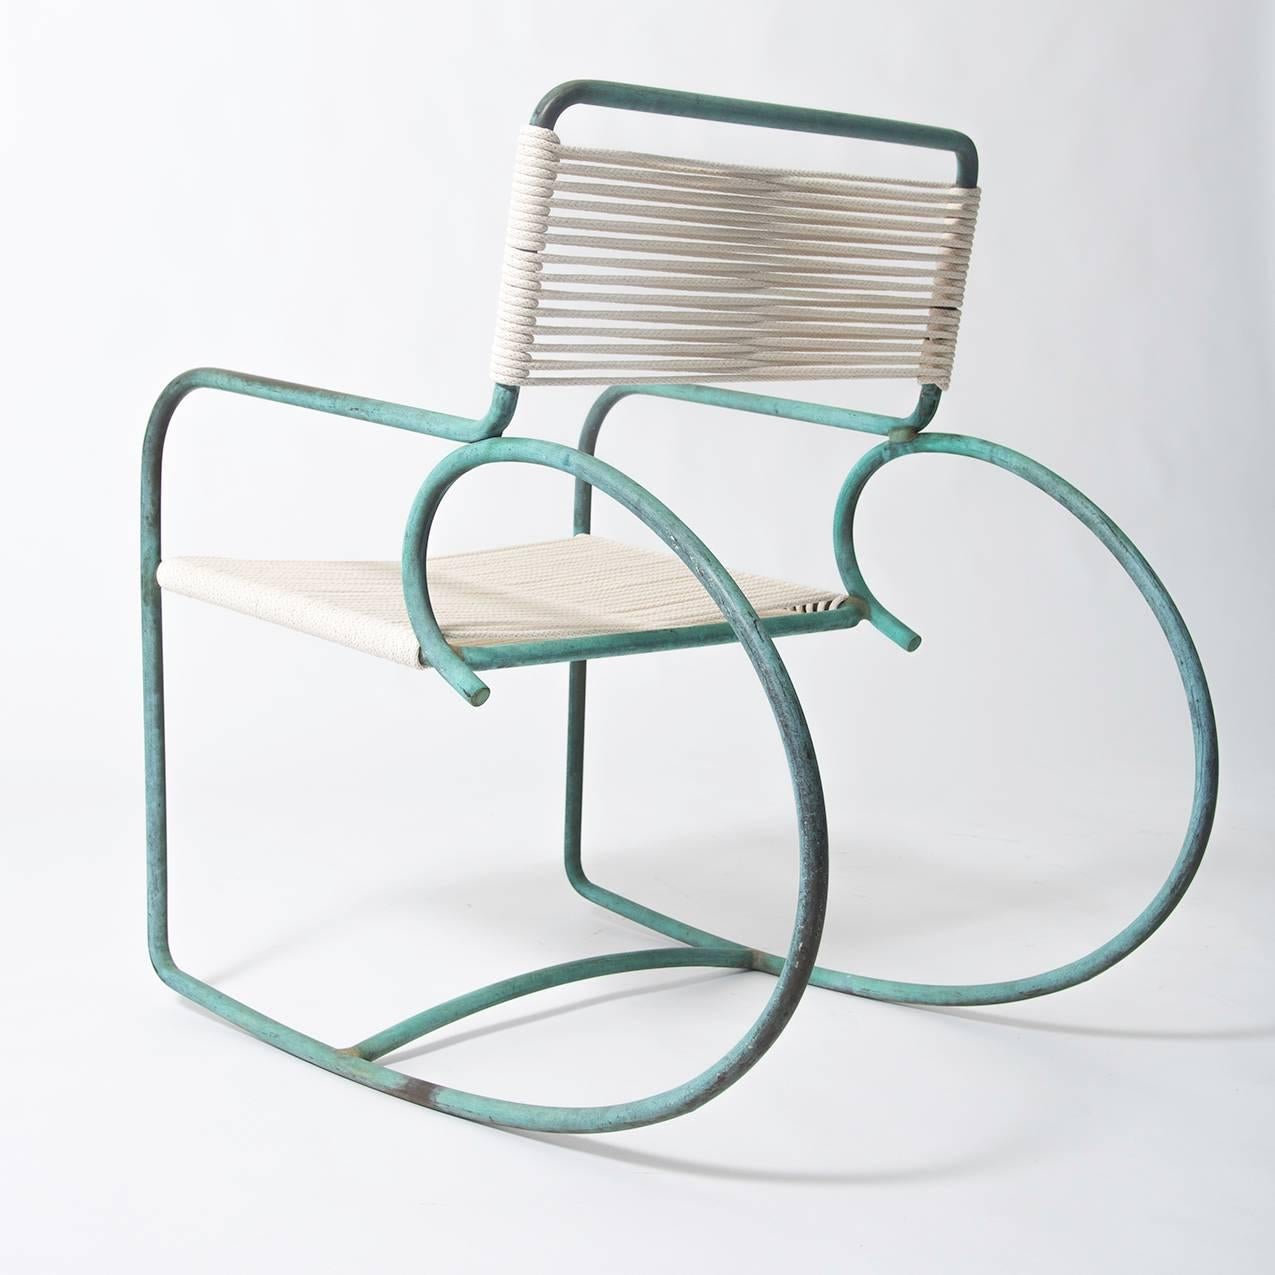 Walter Lamb's patio rocking chair, produced by Brown Jordan. The chair has a sculptural shape, with a single formation of tubular bronze forming the backrest, arms, and exaggerated round runners. The back and seat are strung with cotton rope,